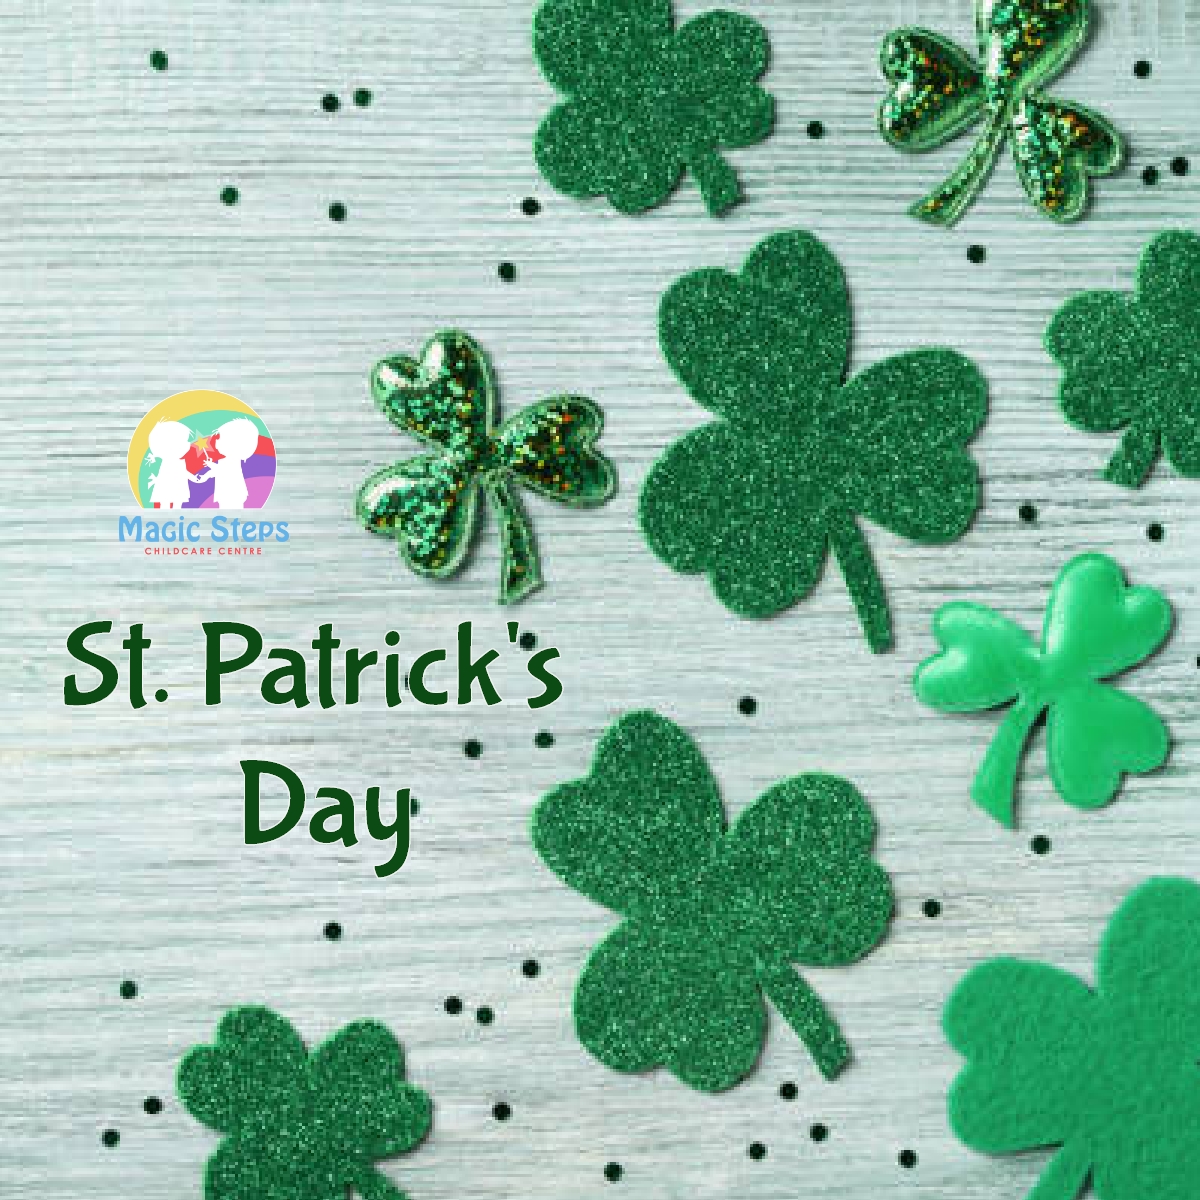 St. Patrick's Day- Wednesday 17th March